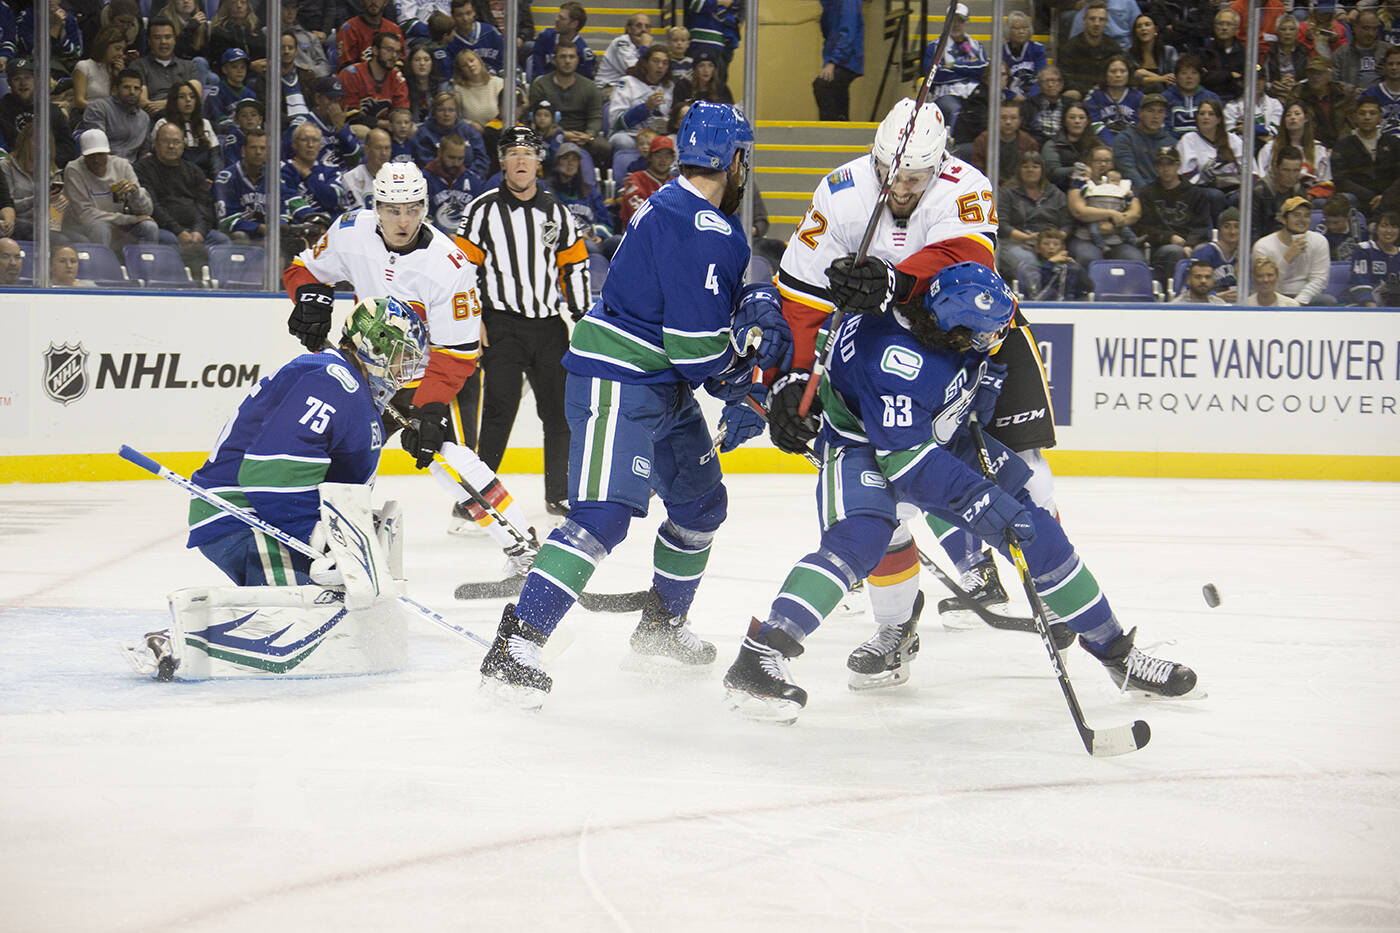 The Calgary Flames came out on top against the Vancouver Canucks in pre-season action in Victoria at the Save-On-Foods Memorial Centre back in 2019. (Black Press Media file photo)